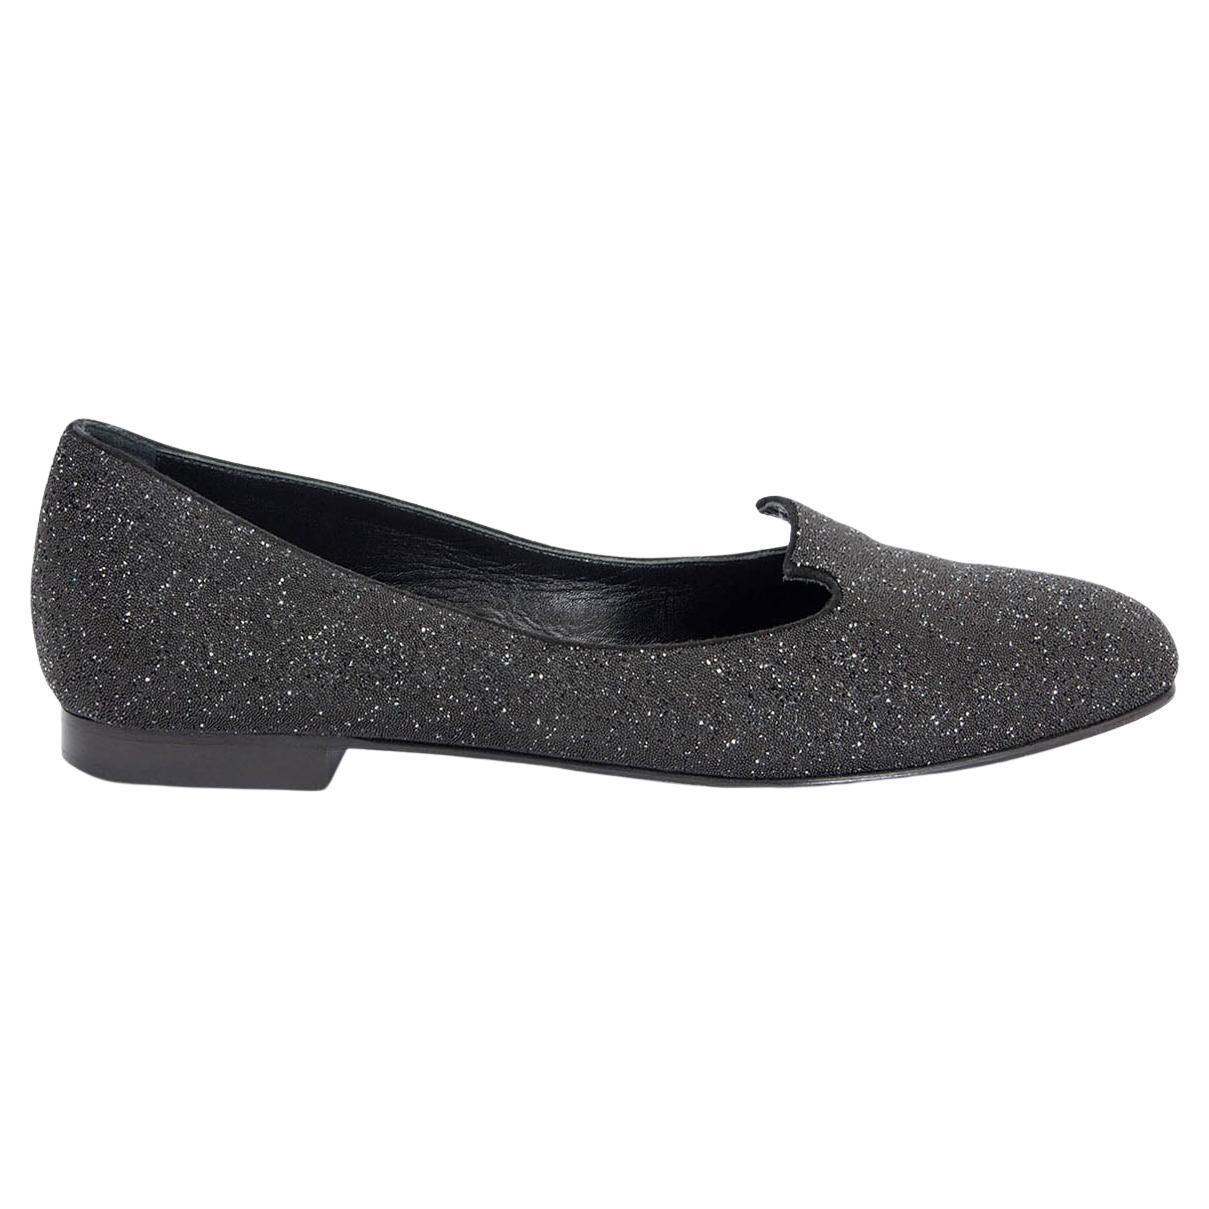 HERMES black leather HOLLY GLITTER Loafers Shoes 37.5 For Sale